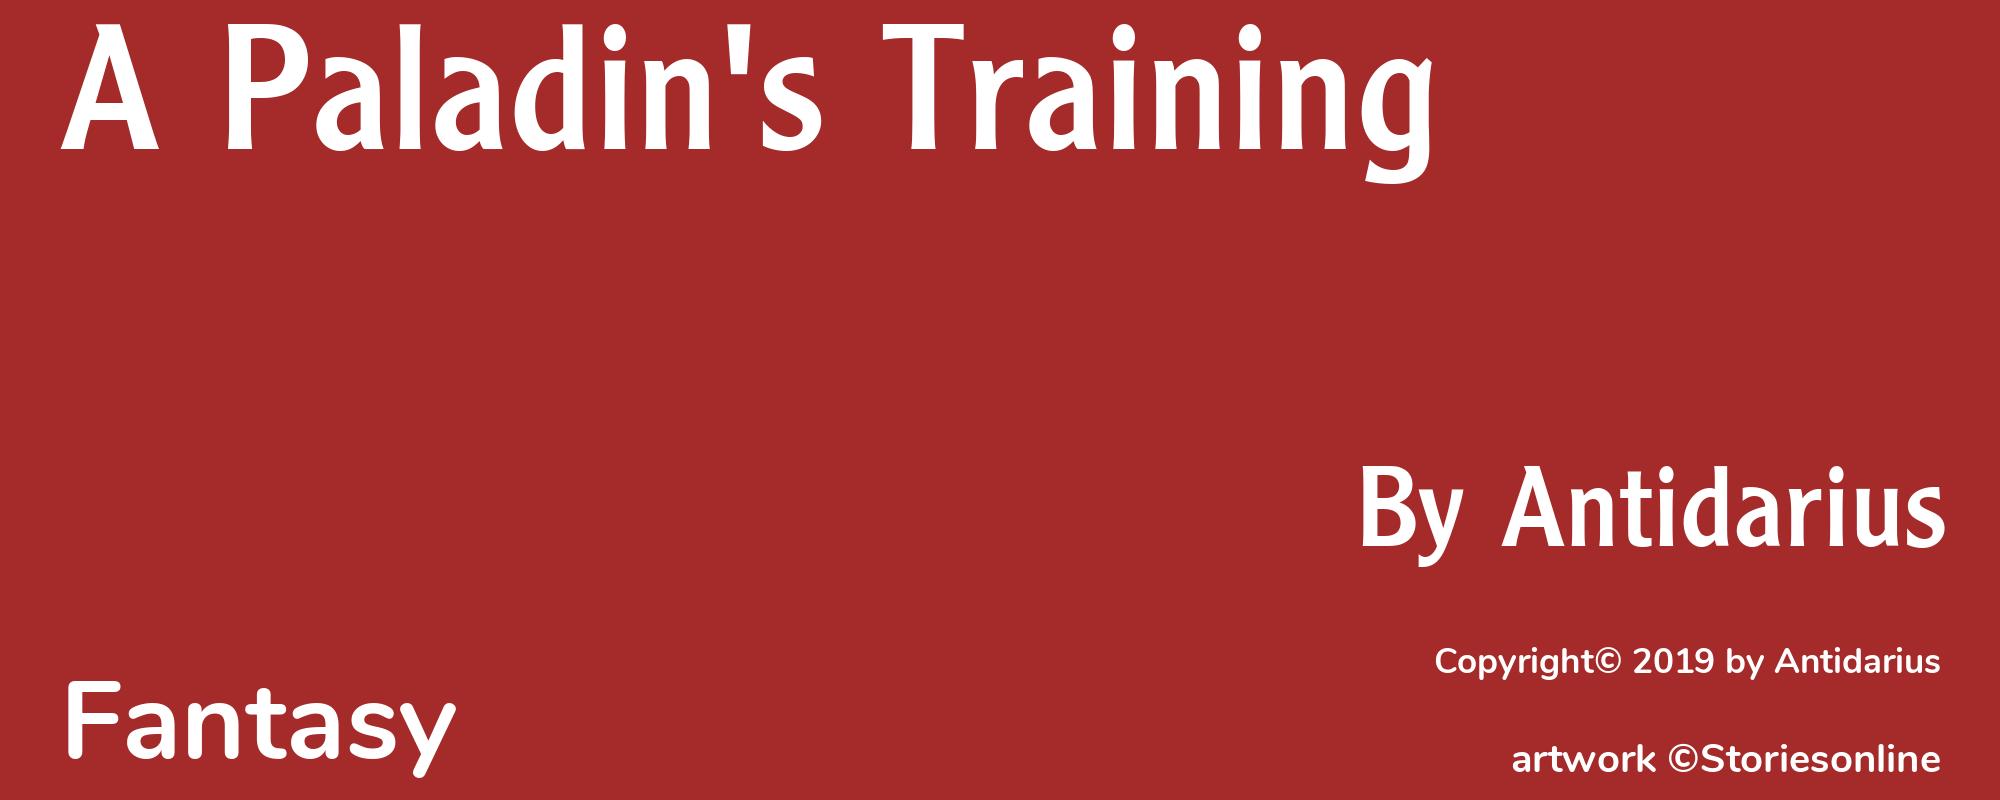 A Paladin's Training - Cover